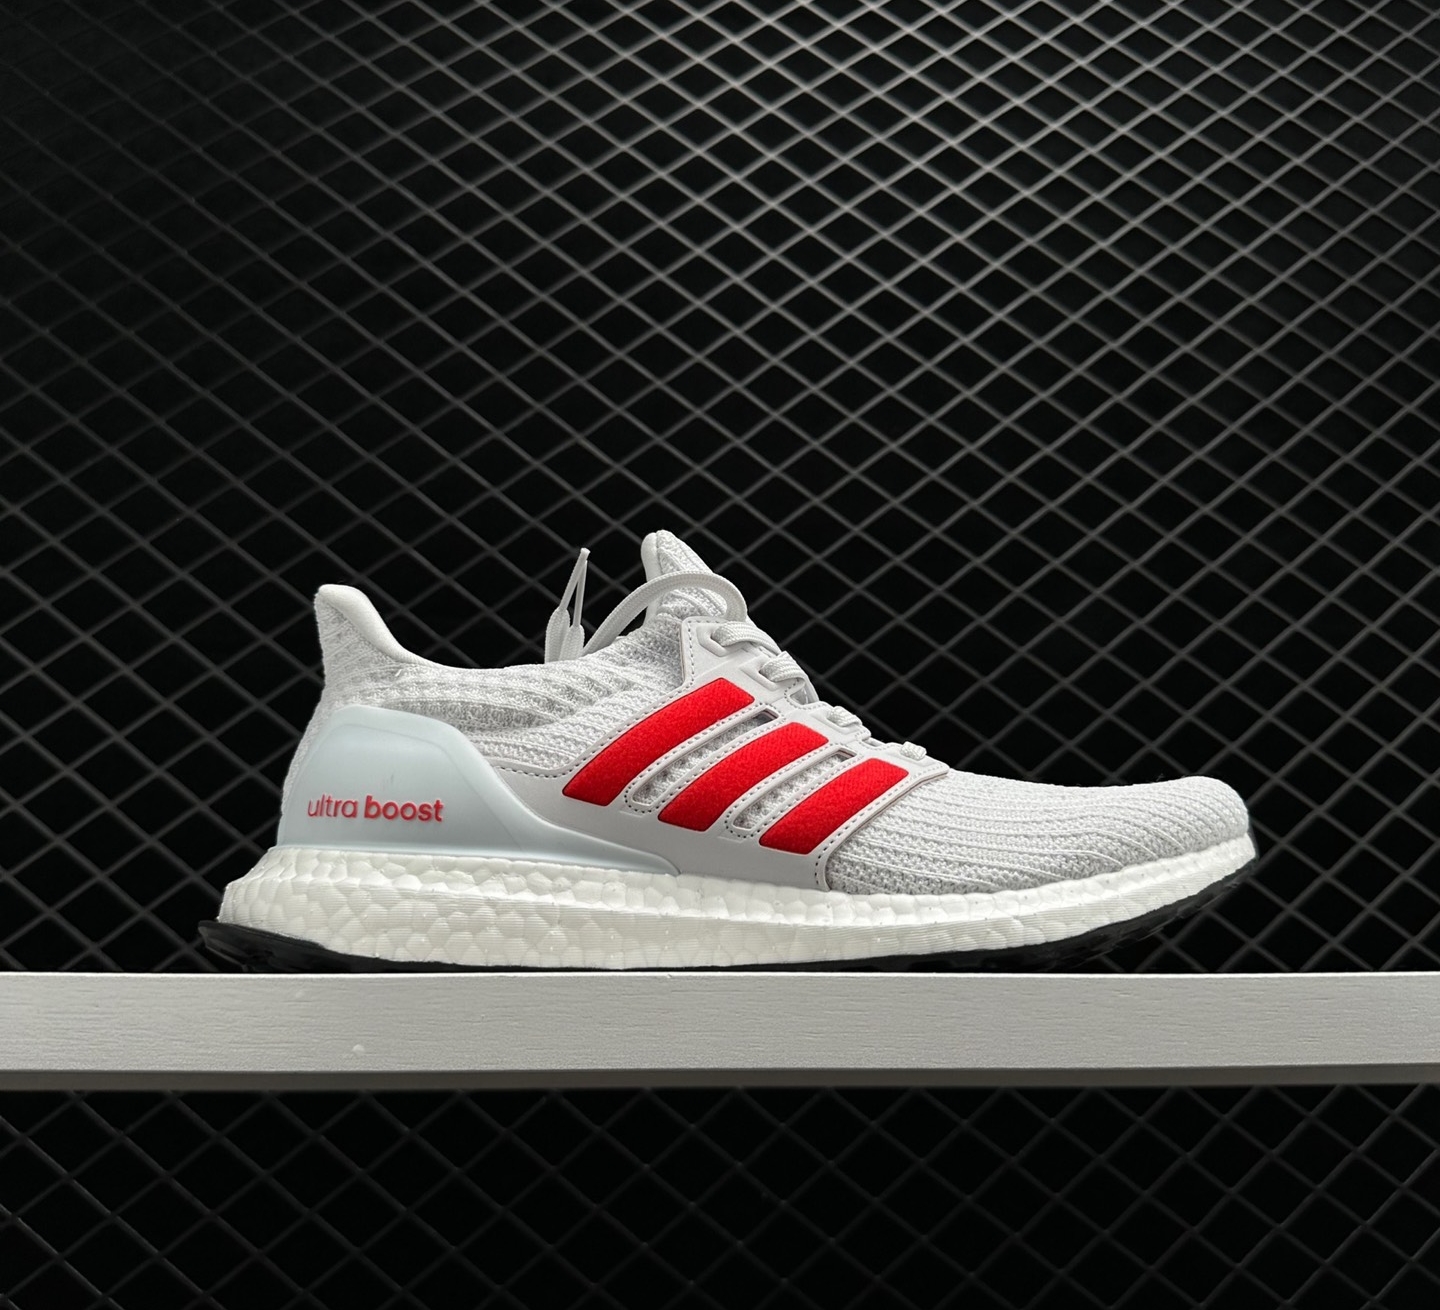 Adidas UltraBoost 4.0 DNA White Scarlet FY9336 - Stylish and Comfy Shoes